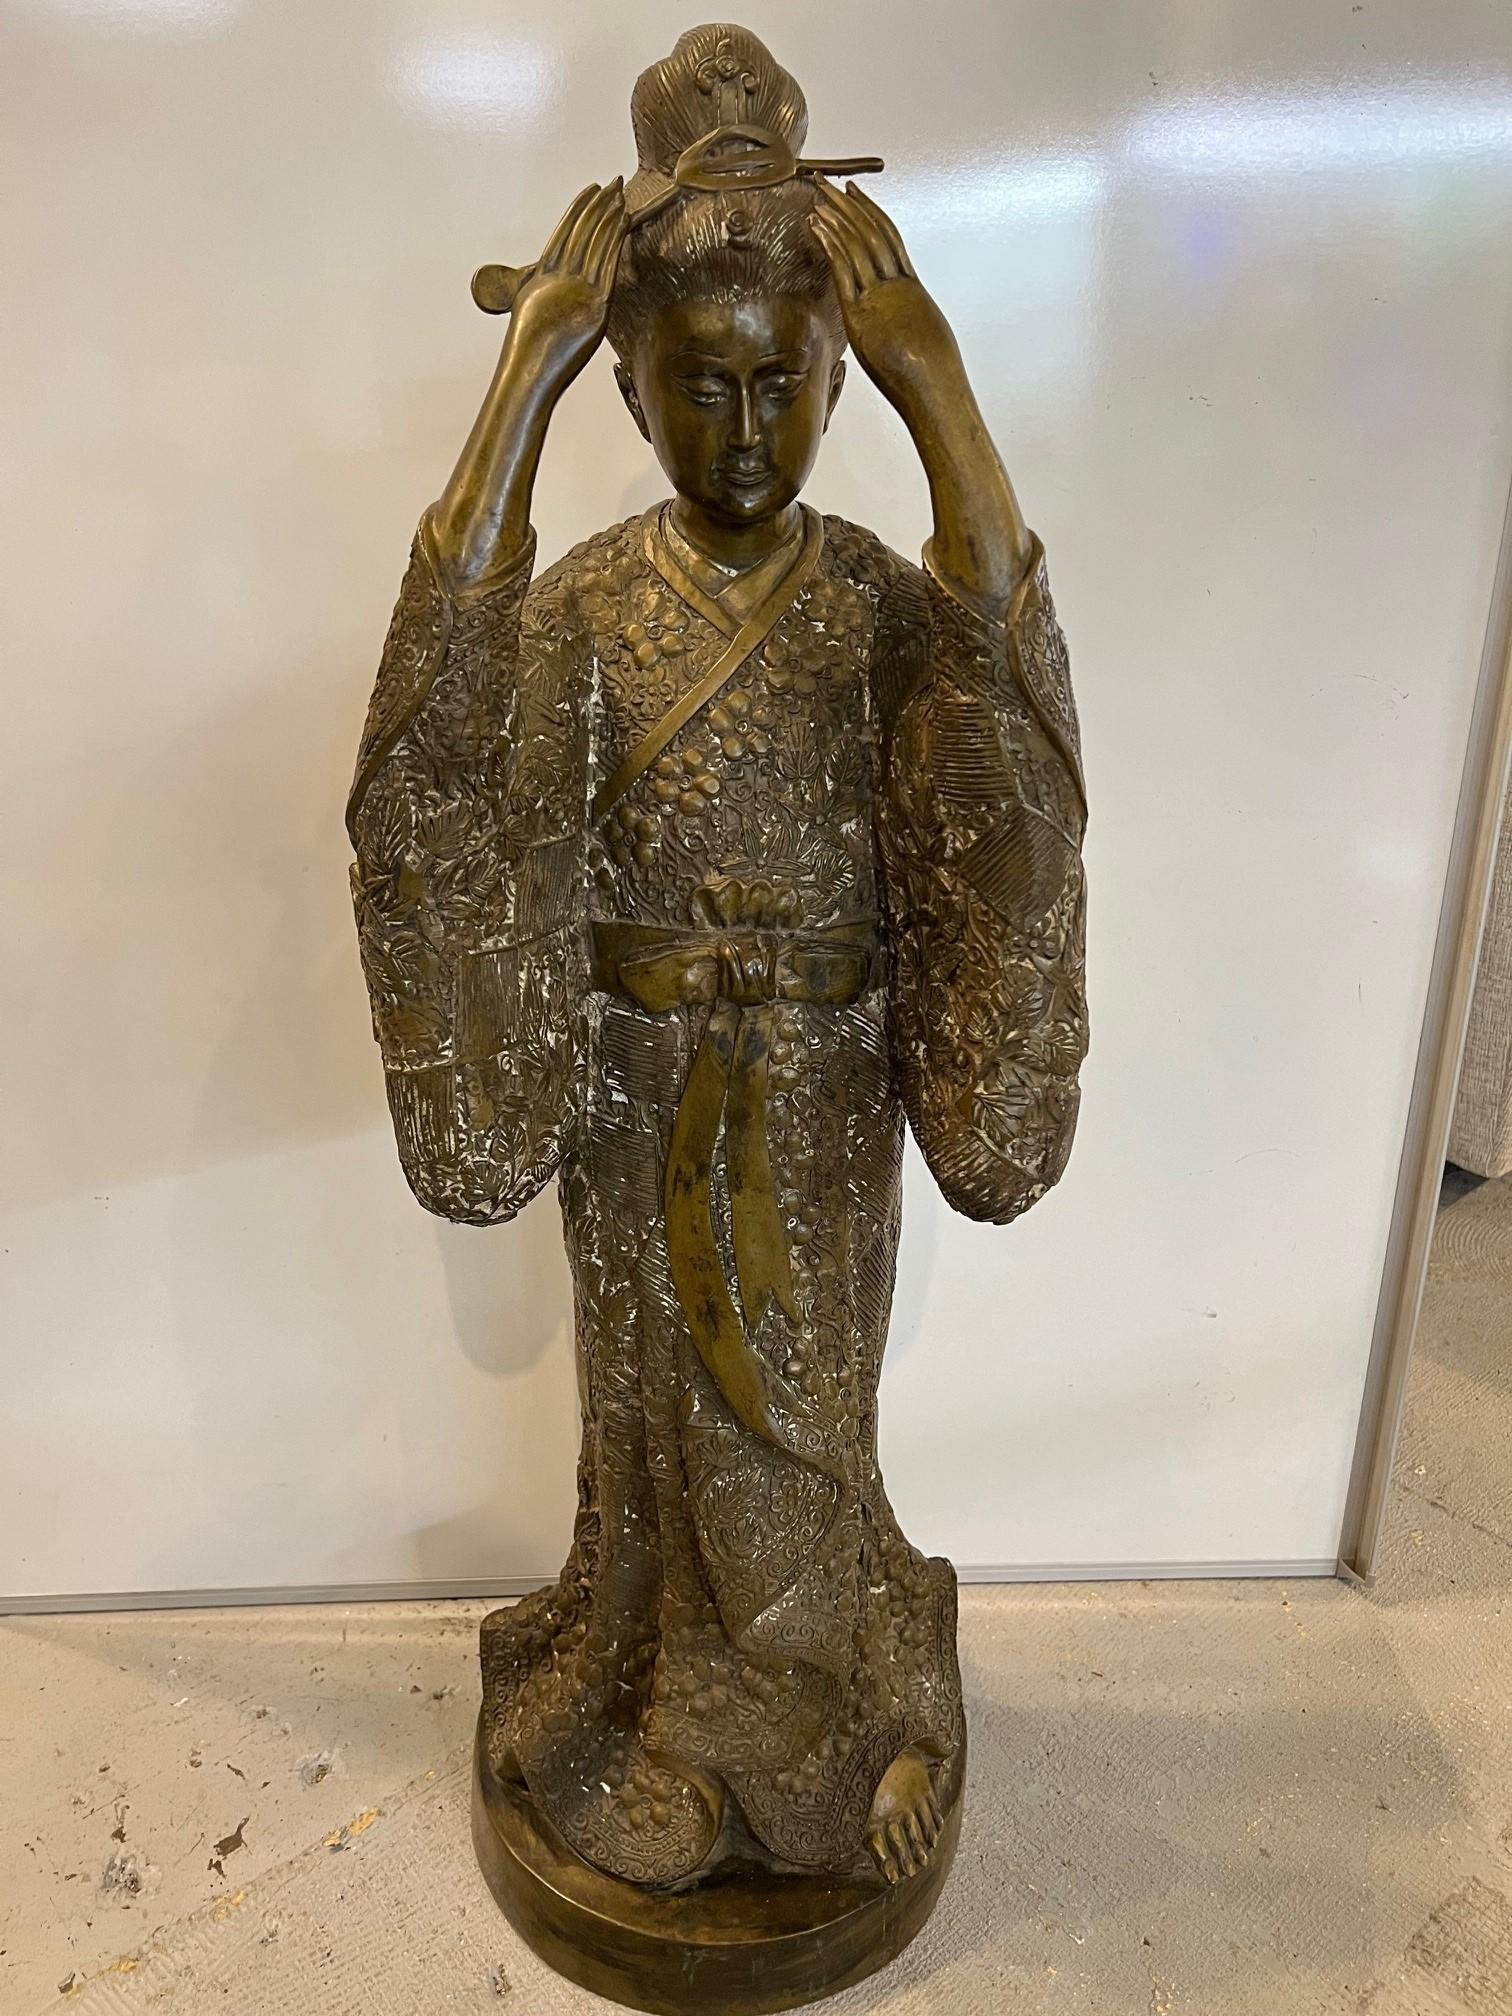 Beautiful bronze figure of a standing Japanese geisha in a traditional kimono with an obi. The geisha's susohiki kimono is laced with an intricate pattern of flowers, leaves and vines. Geisha are a class of female Japanese performing artist and